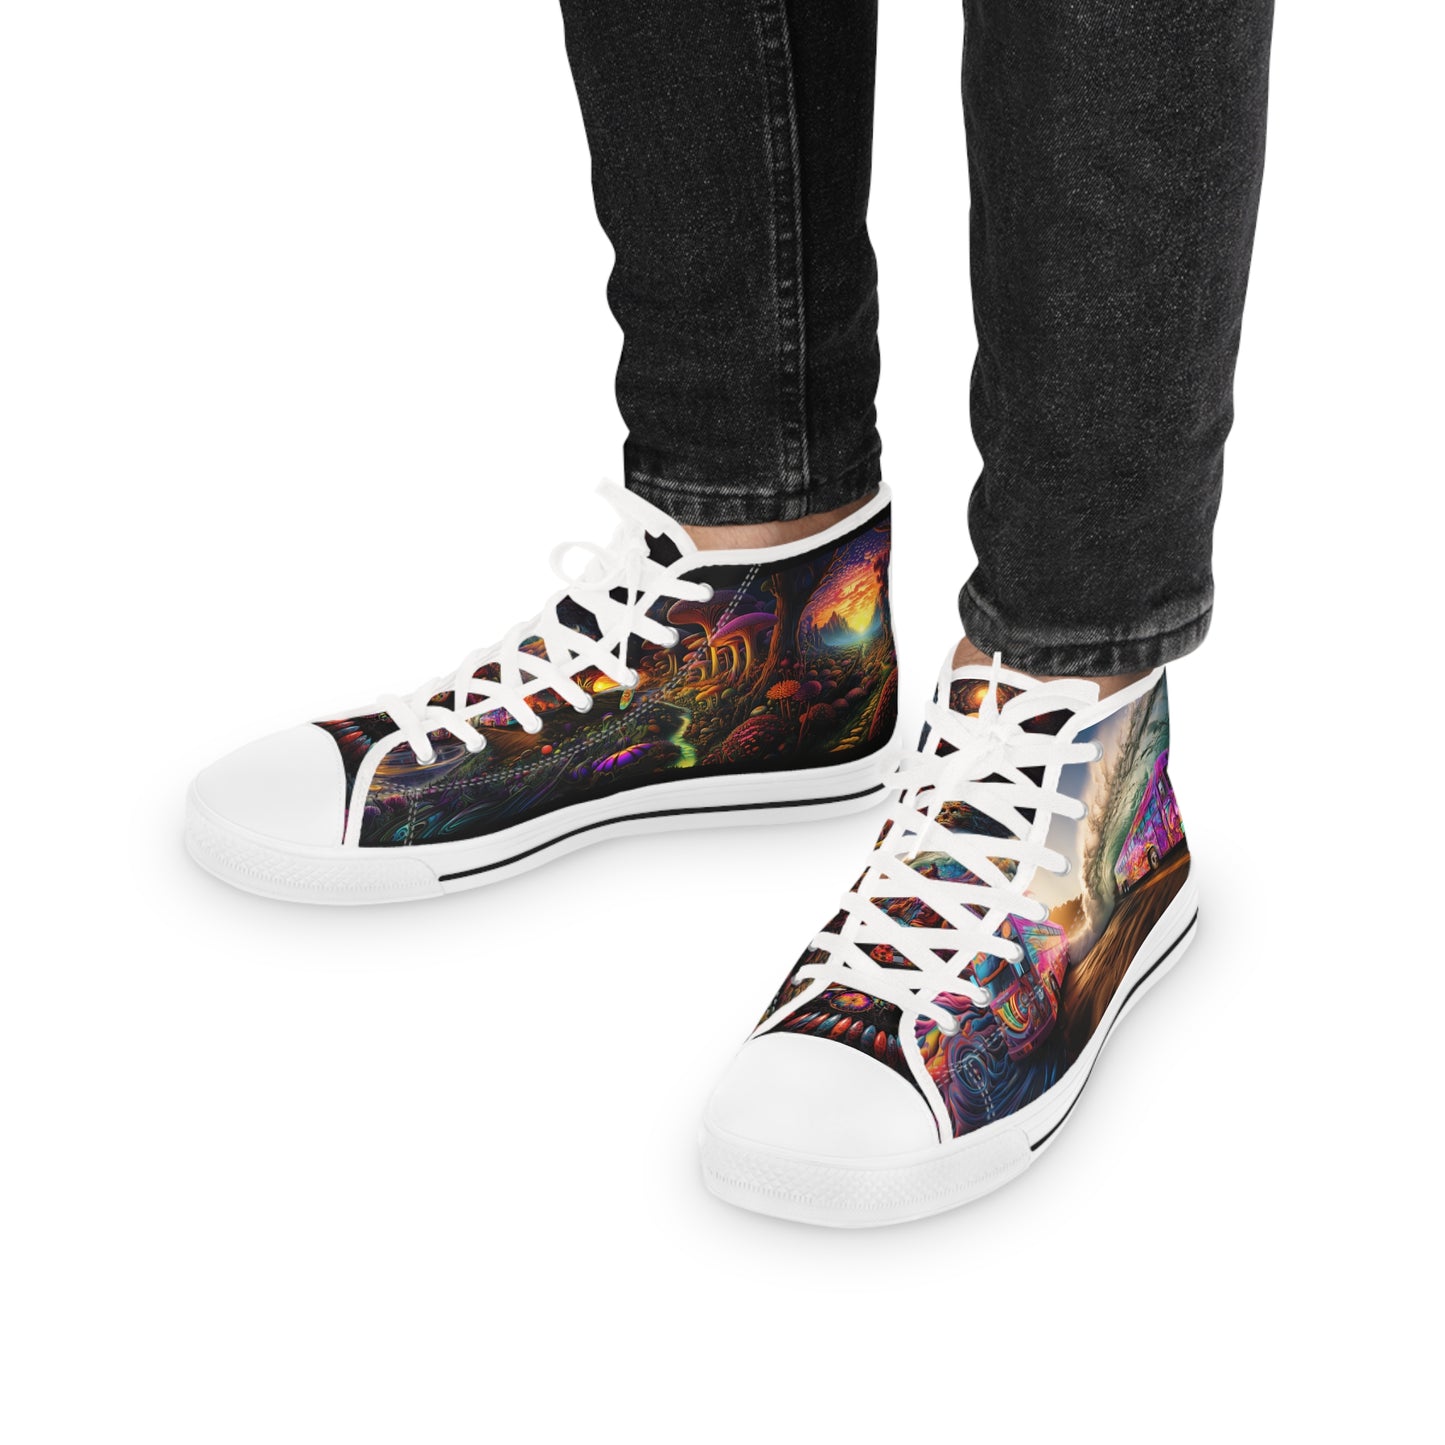 Dance to the Psychedelic Beats in our Unisex High Top Sneakers #001. Style in every step, exclusively at Stashbox.ai.